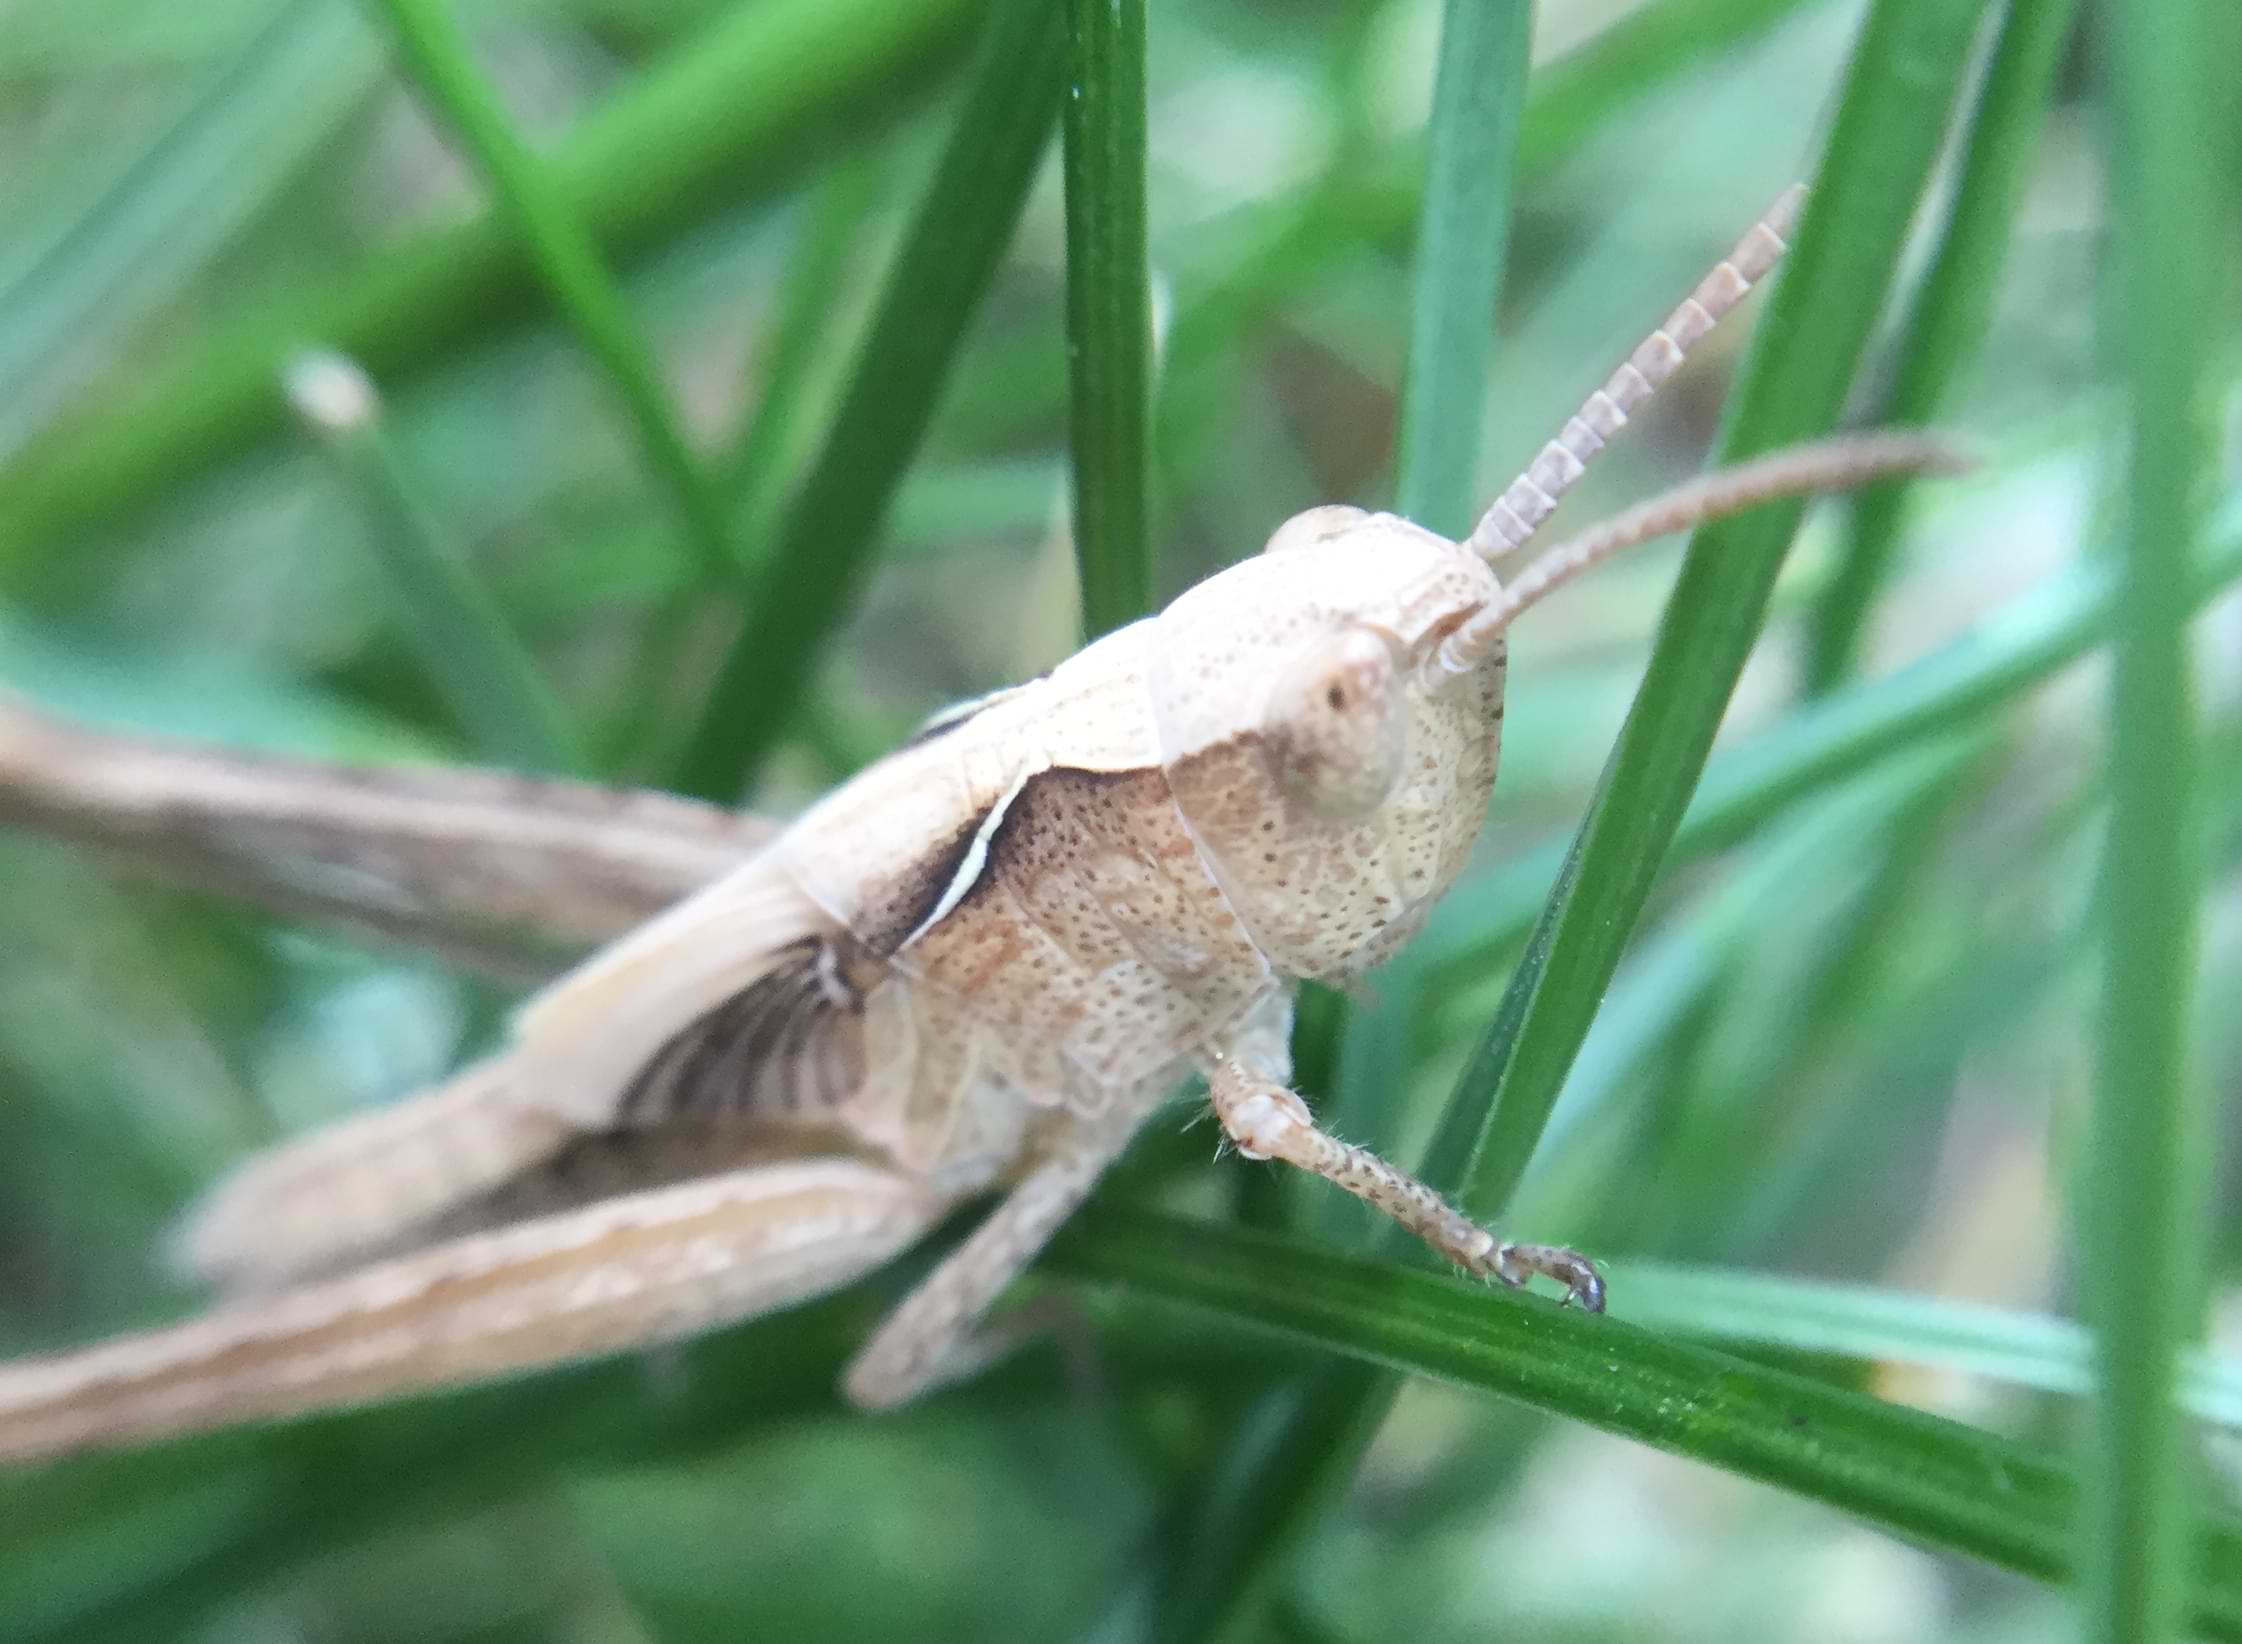 Macro photo of a pale grasshopper resting between some grass.